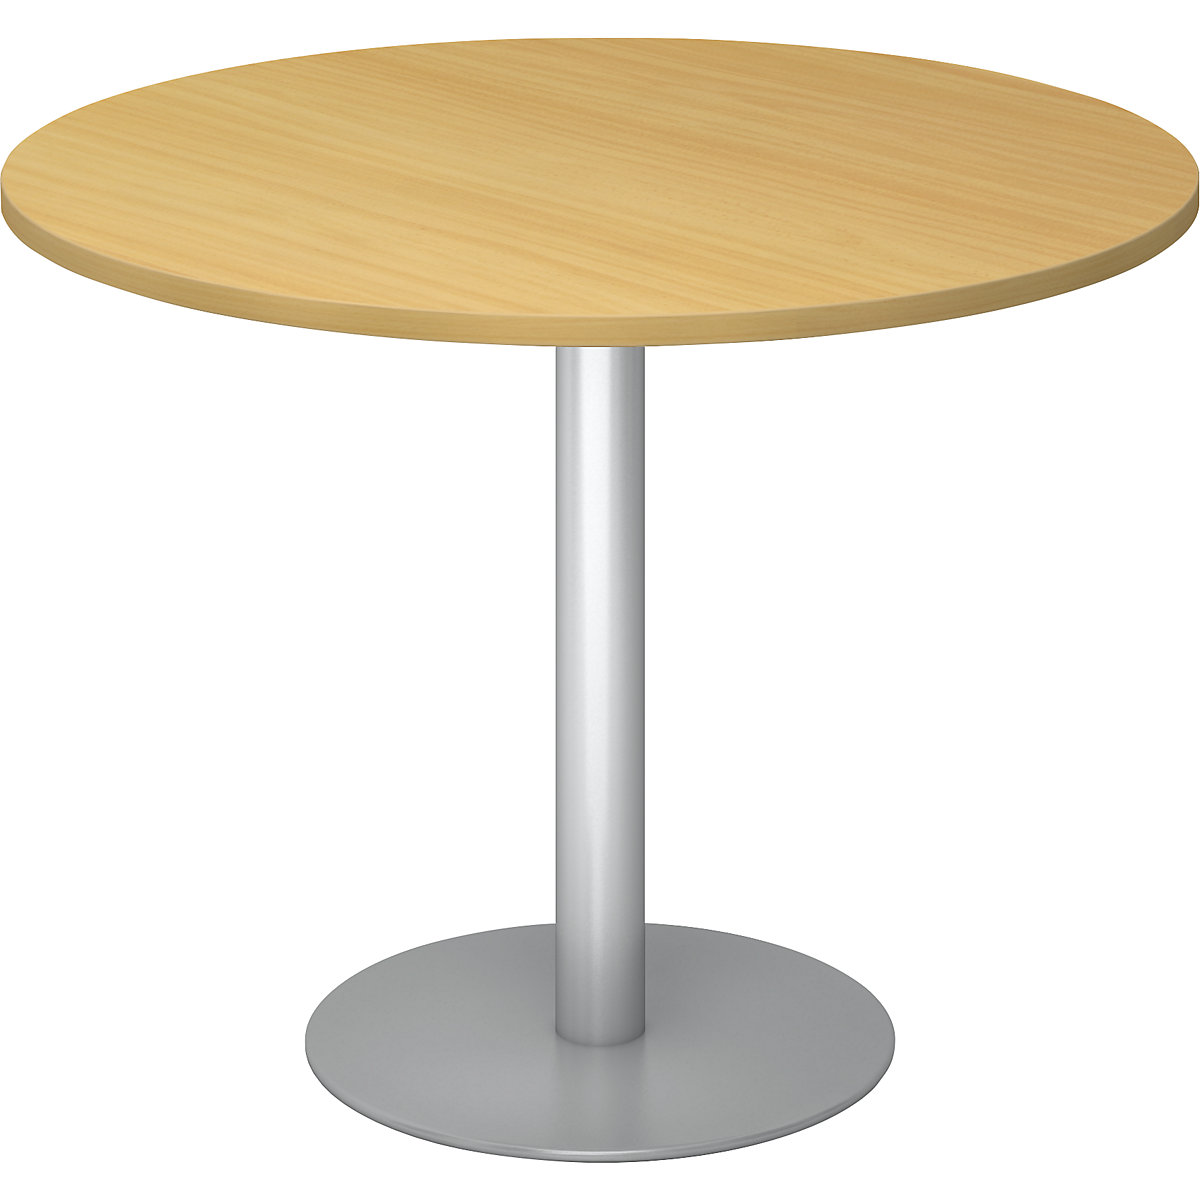 Conference table, Ø 1000 mm, 755 mm high, silver frame, tabletop in beech finish-4